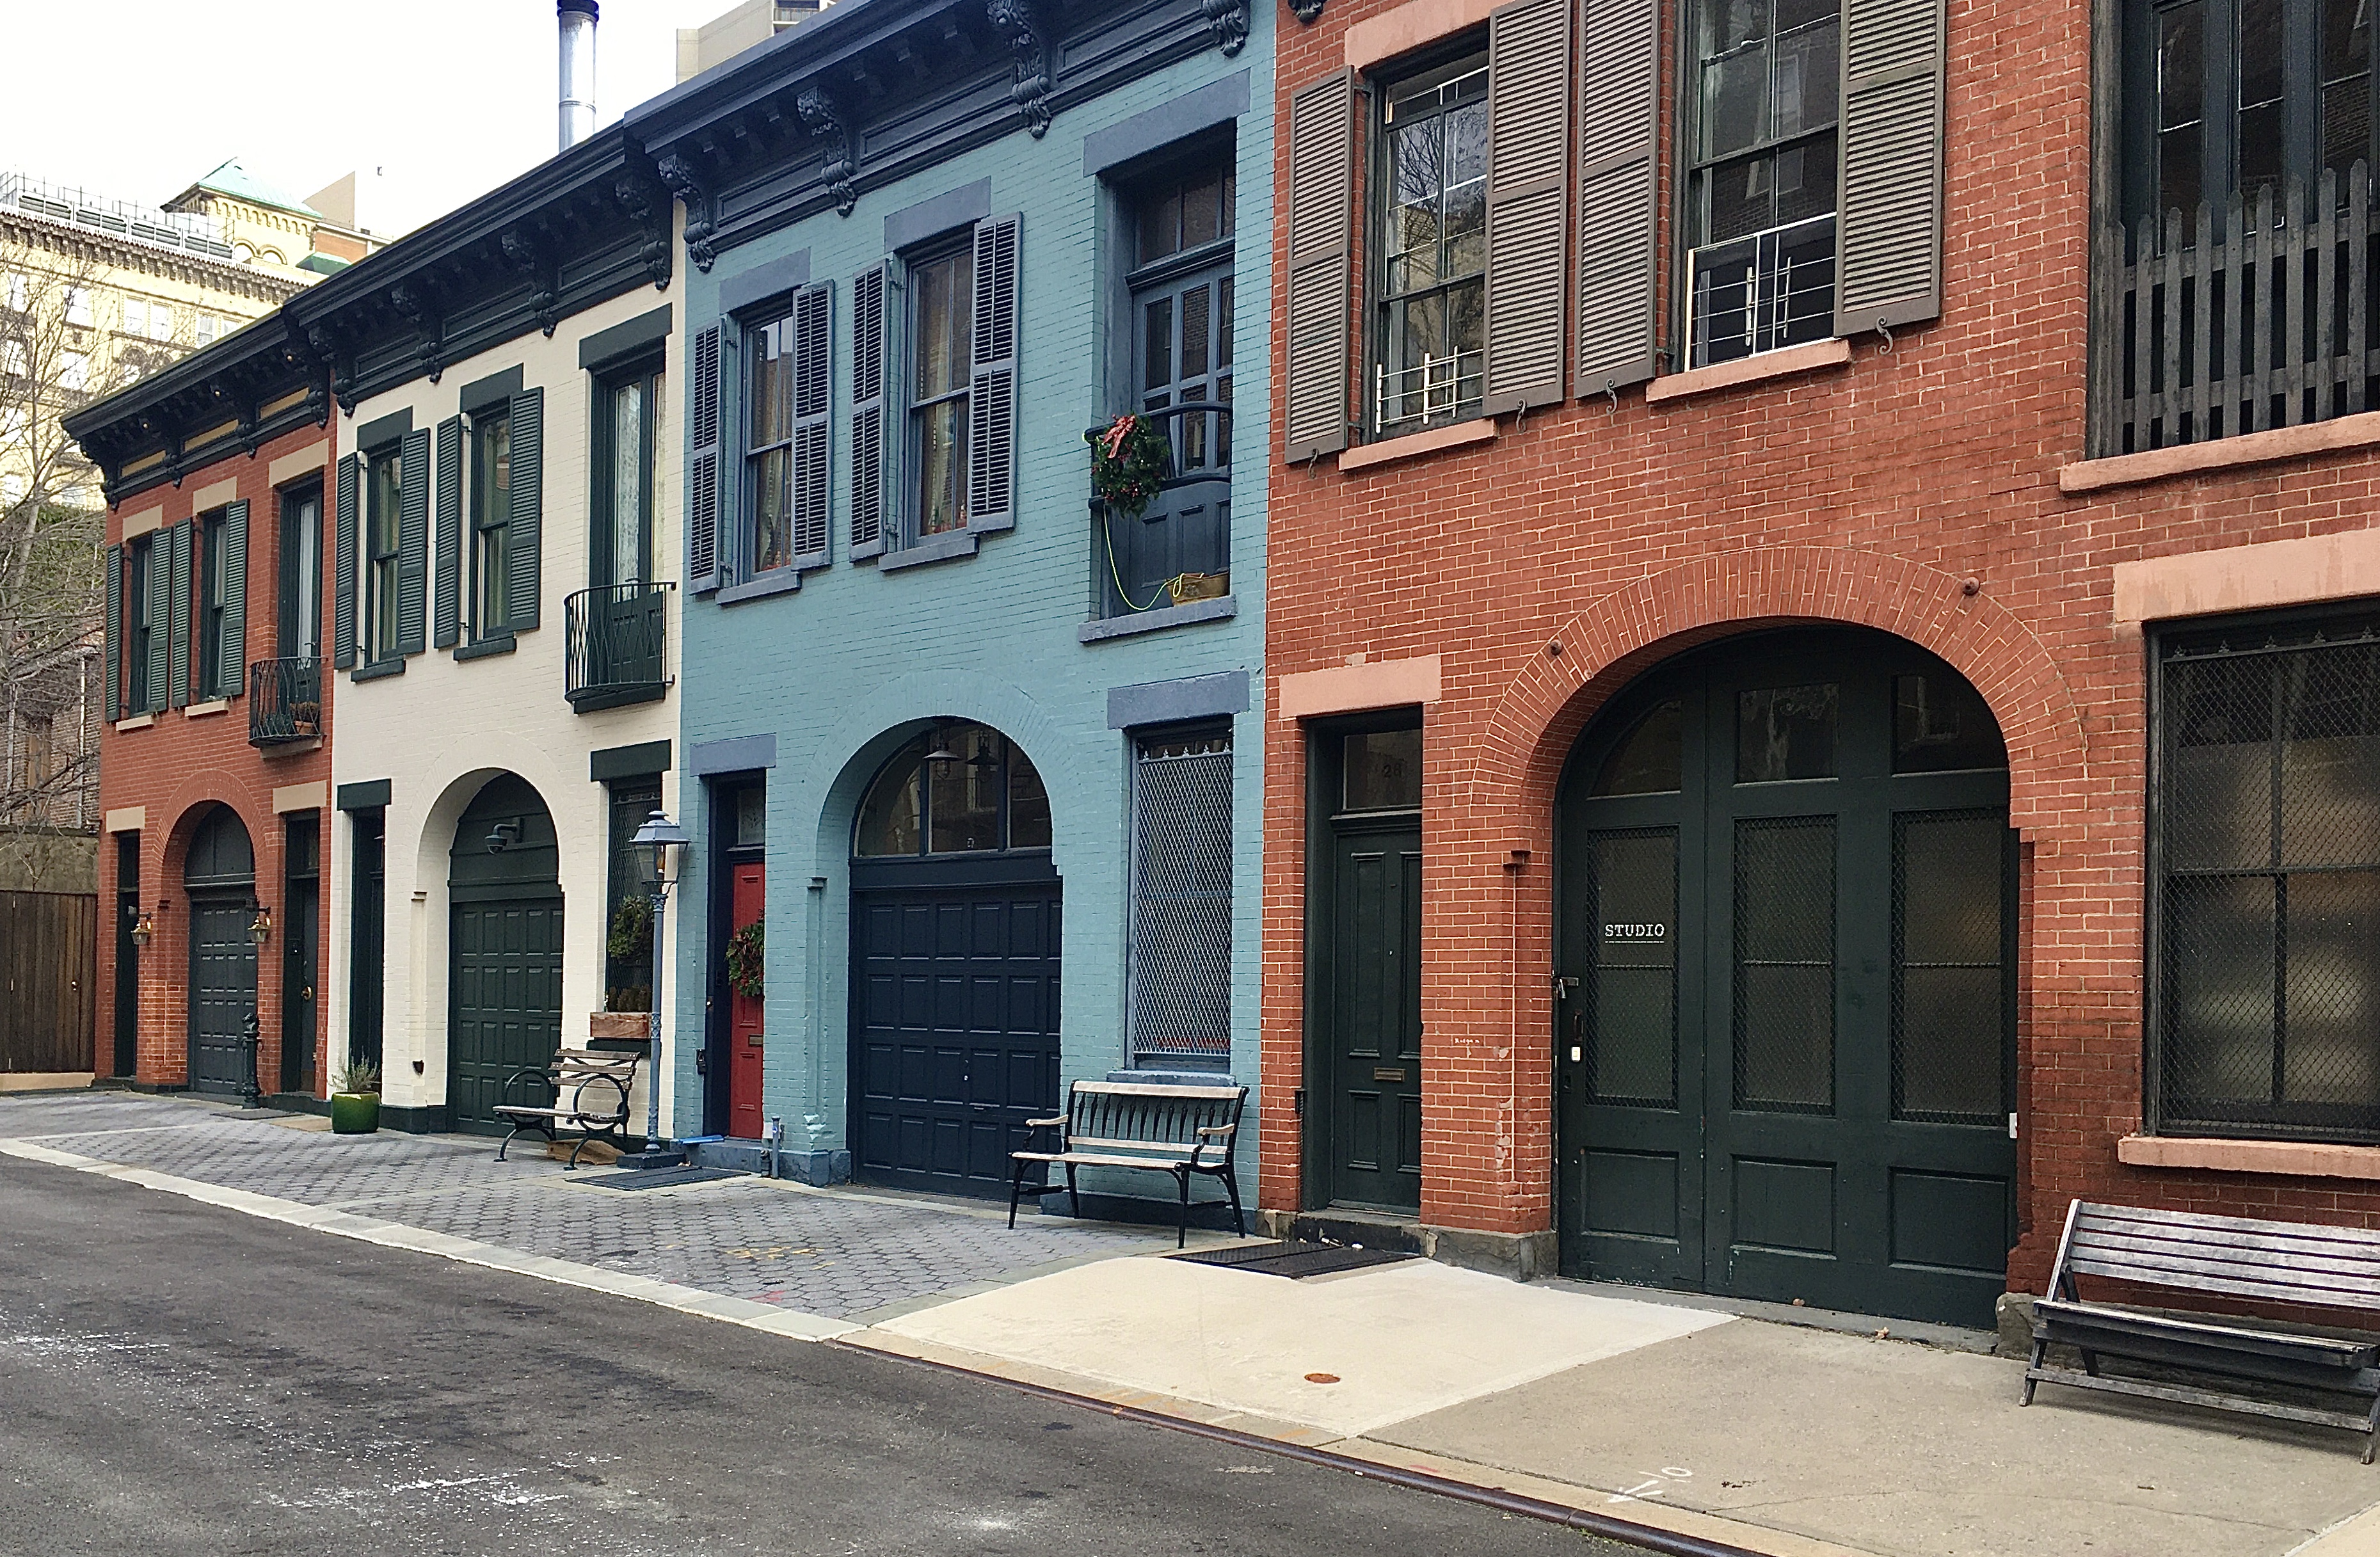 This lovely street is College Place. Photo: Lore Croghan/Brooklyn Eagle 